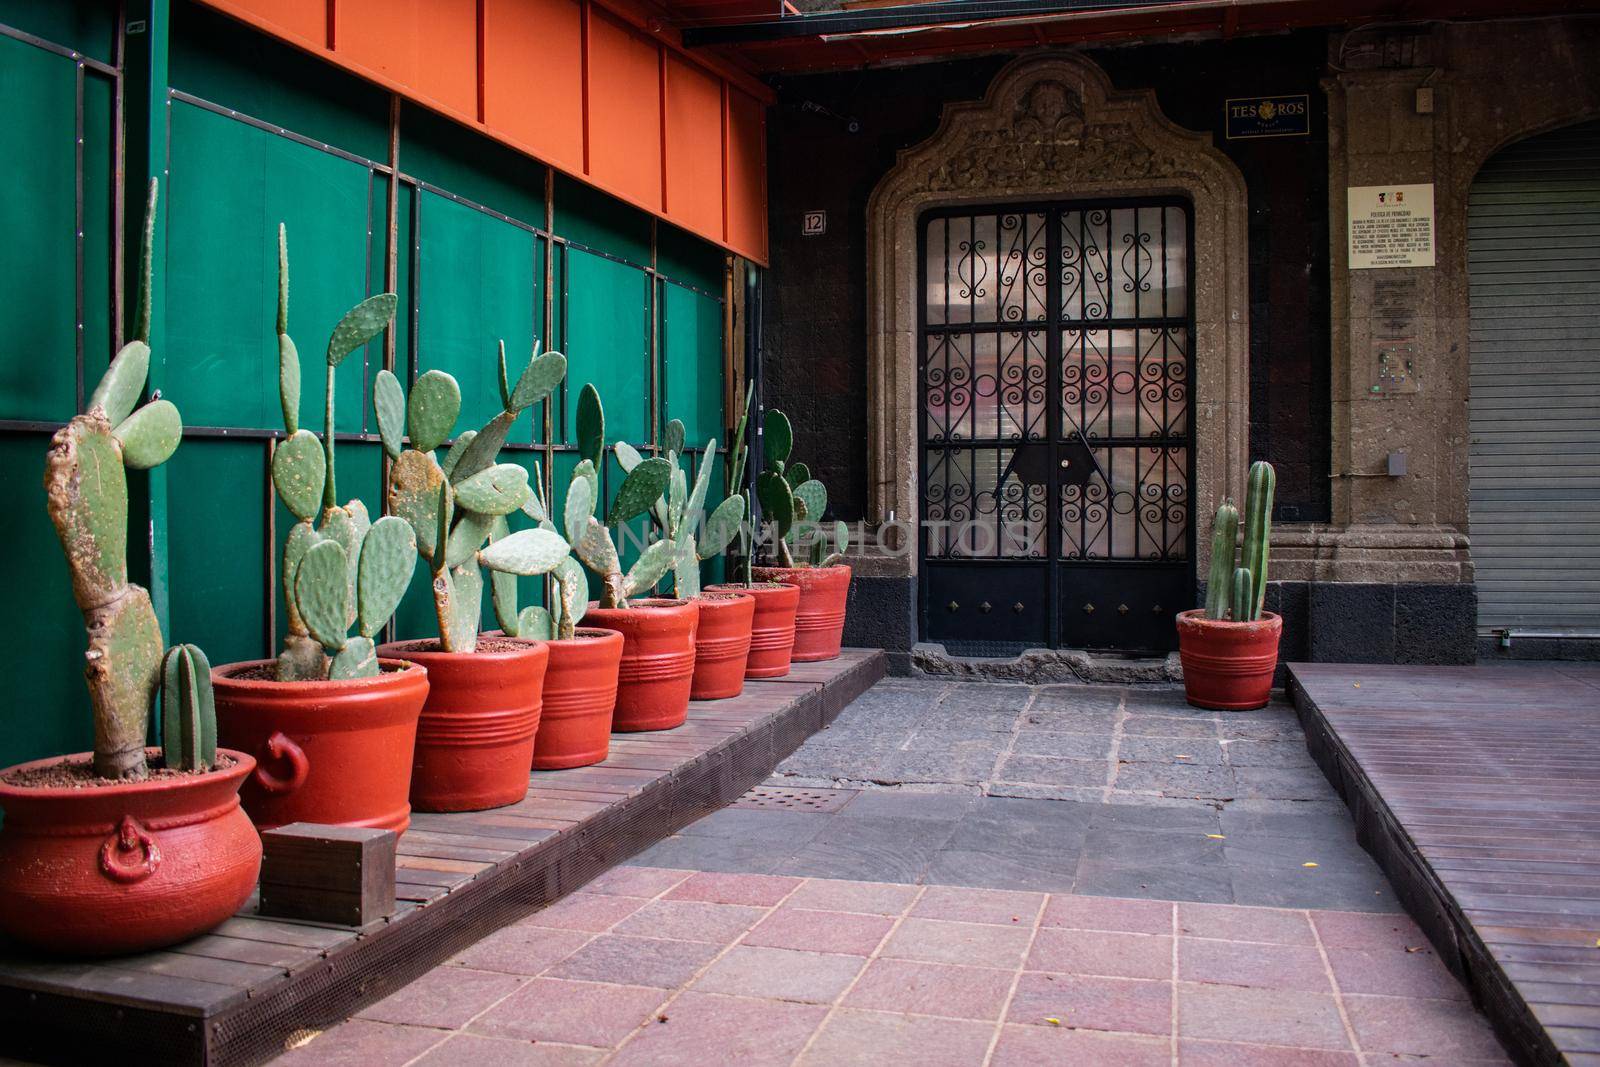 Row of nopales in brown pots next to an old building entrance by Kanelbulle